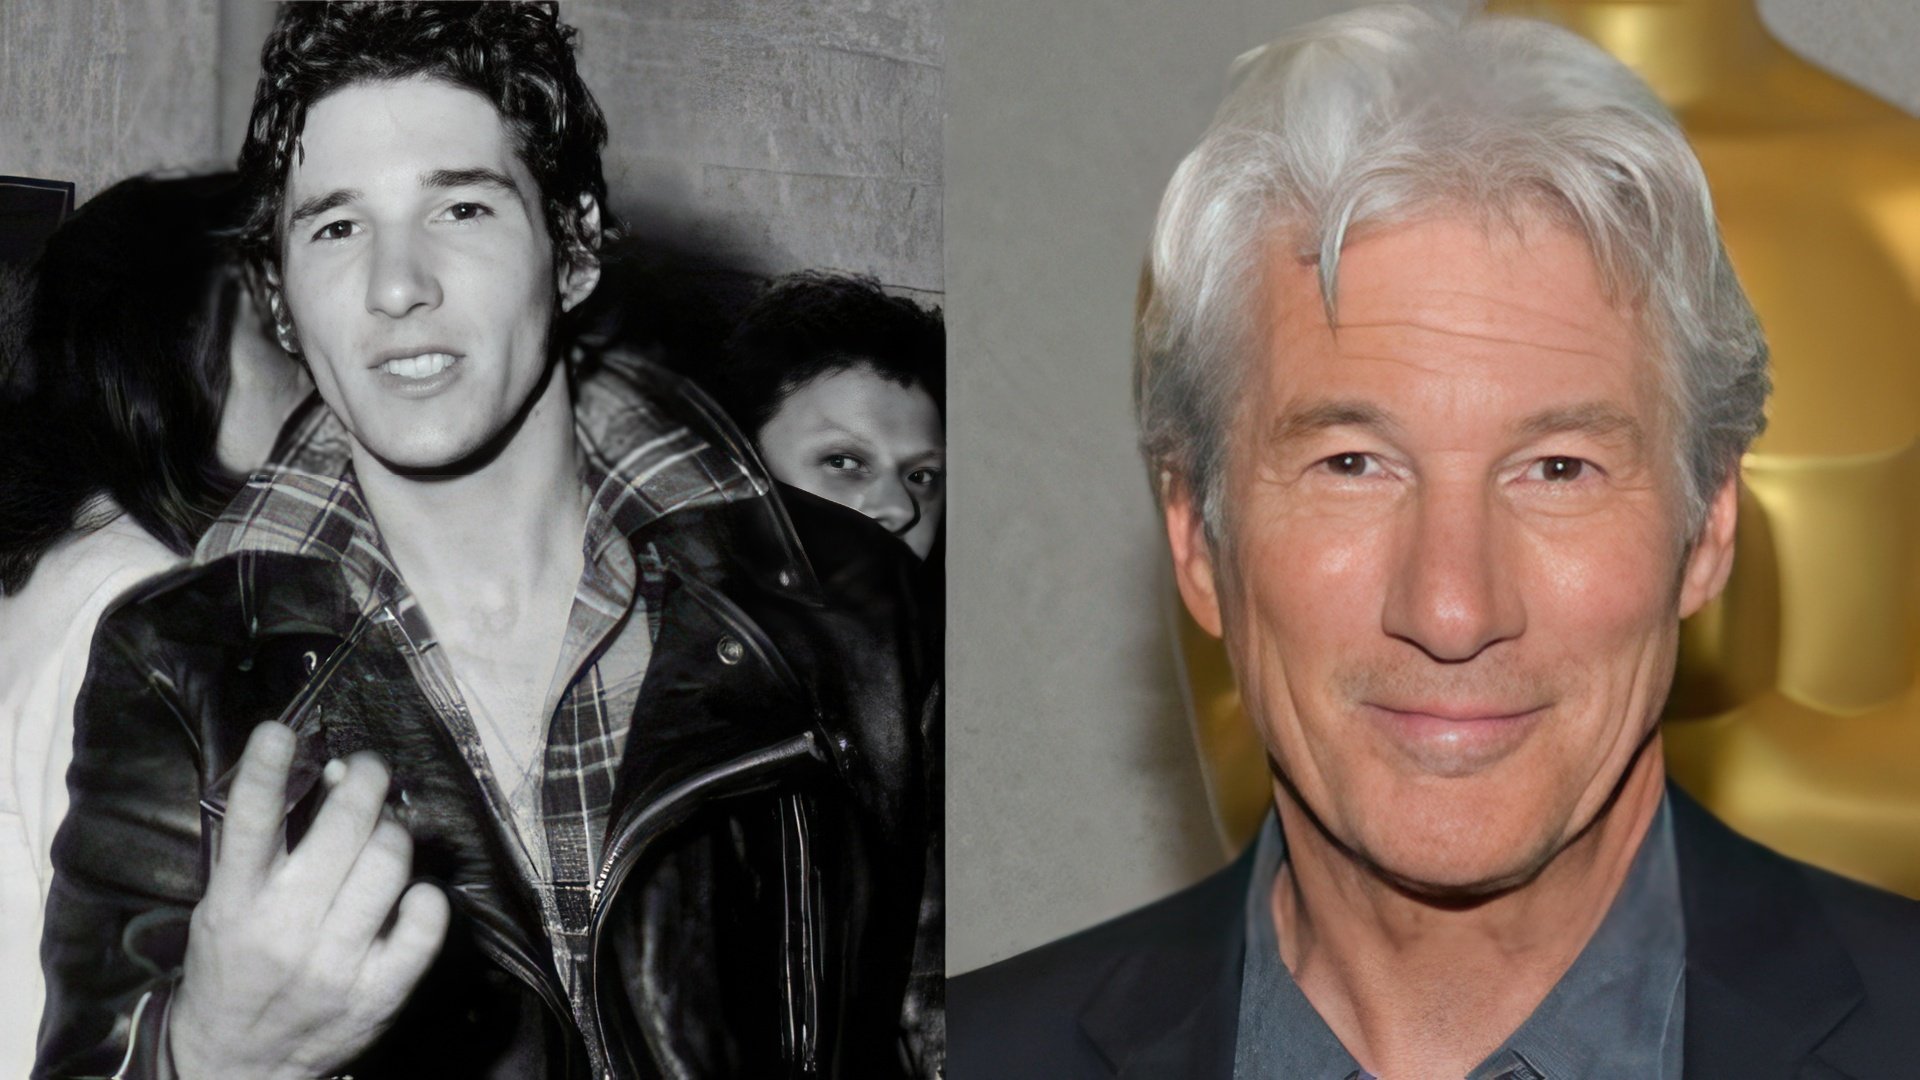 Richard Gere at a young age and now